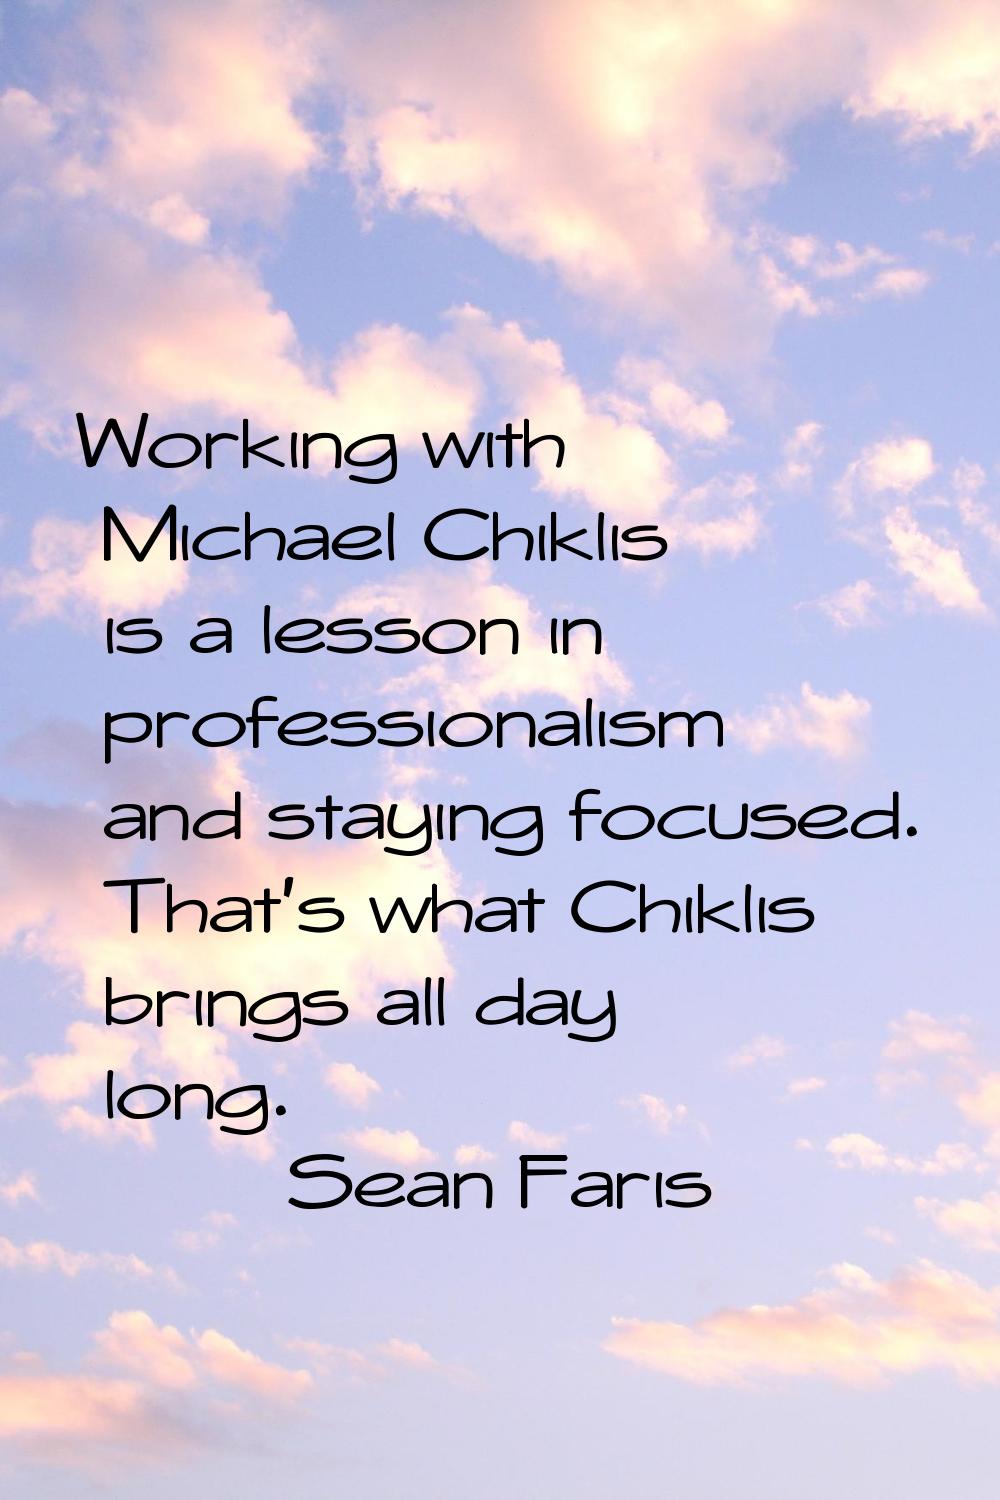 Working with Michael Chiklis is a lesson in professionalism and staying focused. That's what Chikli